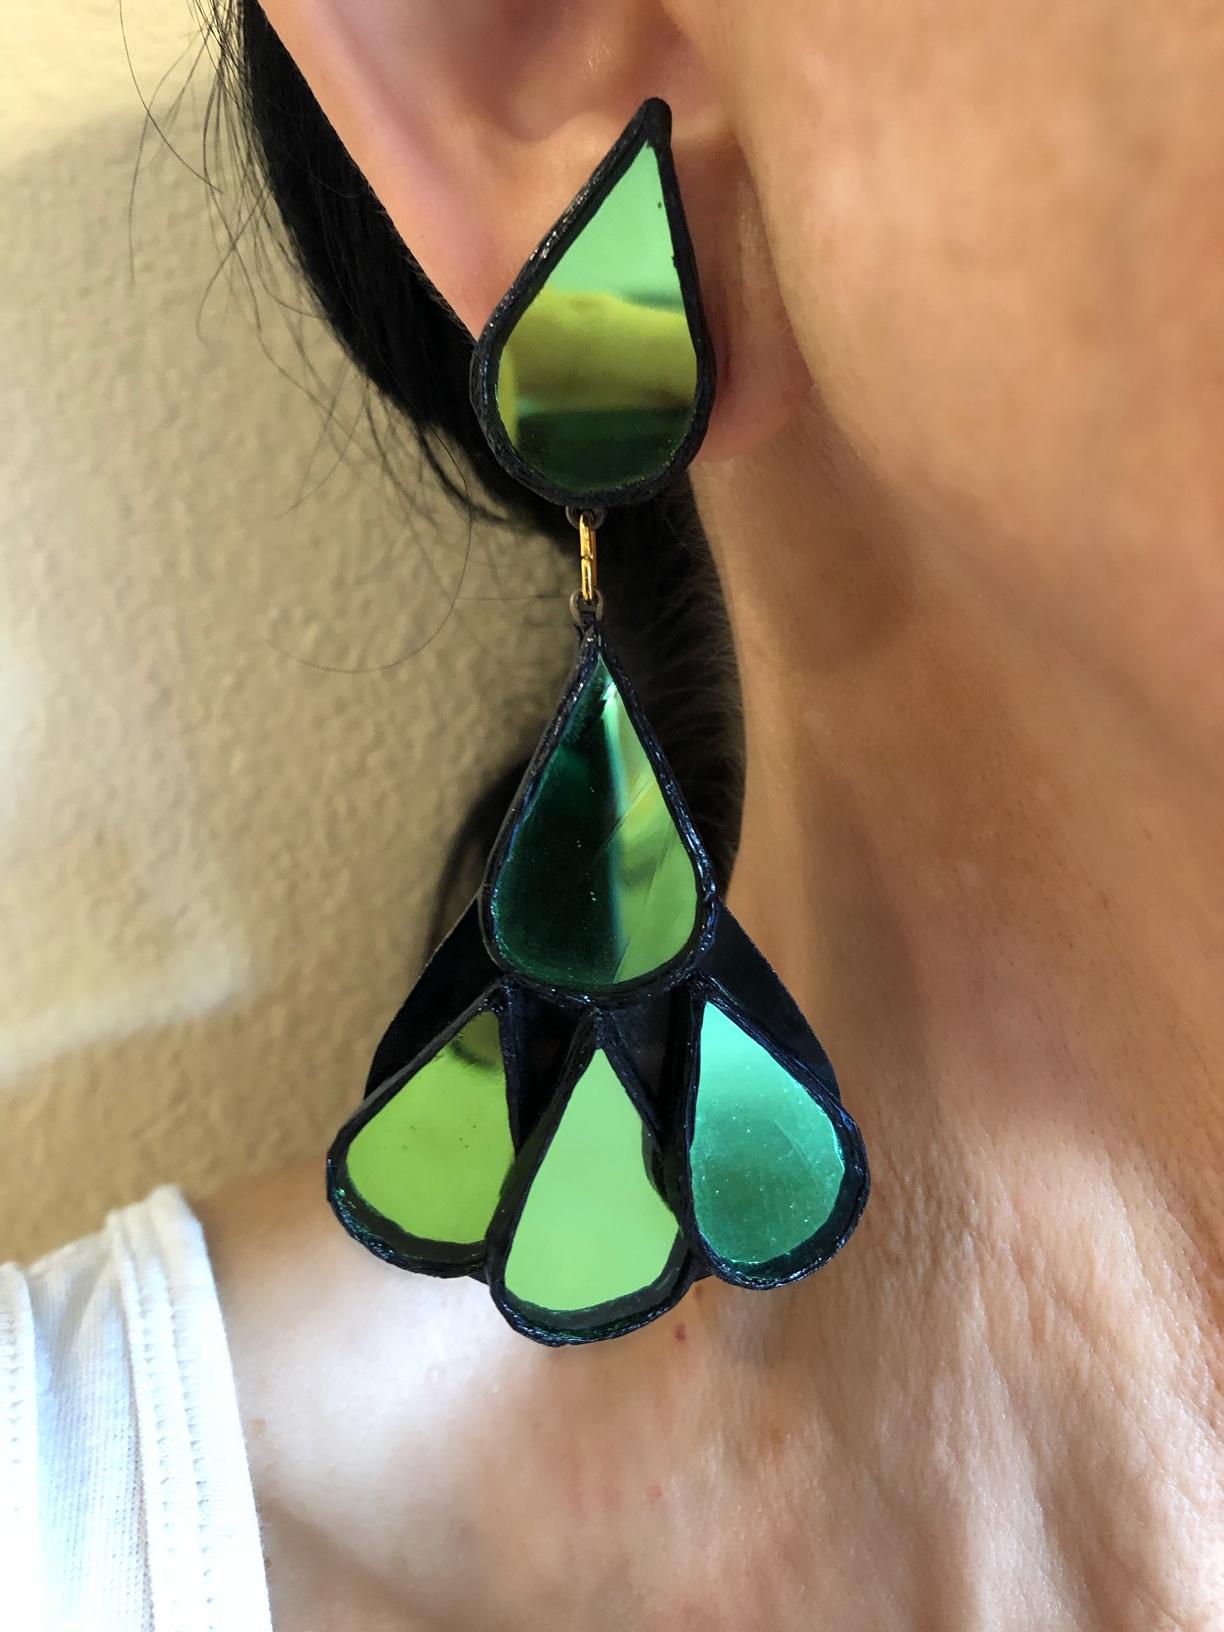 Elegant 1970s - 1980's talosel resin artisanal statement clip-on earrings by Irina Jarworska, Paris. Rare black resin talosel earrings with green encrusted tinted mirrors. Irina was a student who attended Line Vautrins school in Paris where she